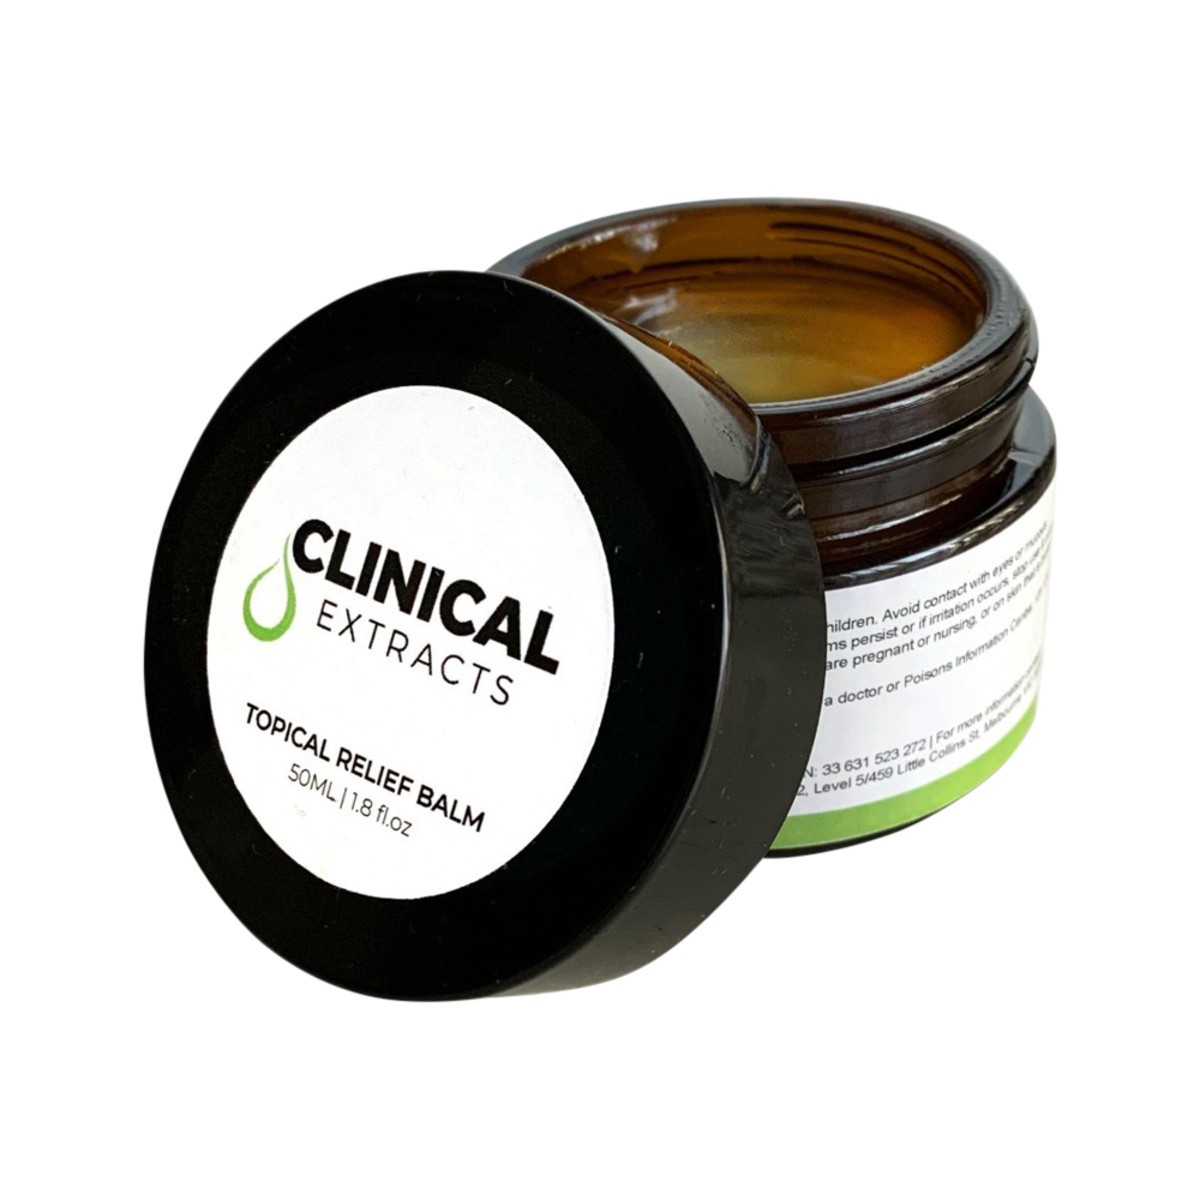 CLINICAL EXTRACTS - Topical Relief Balm 50ml